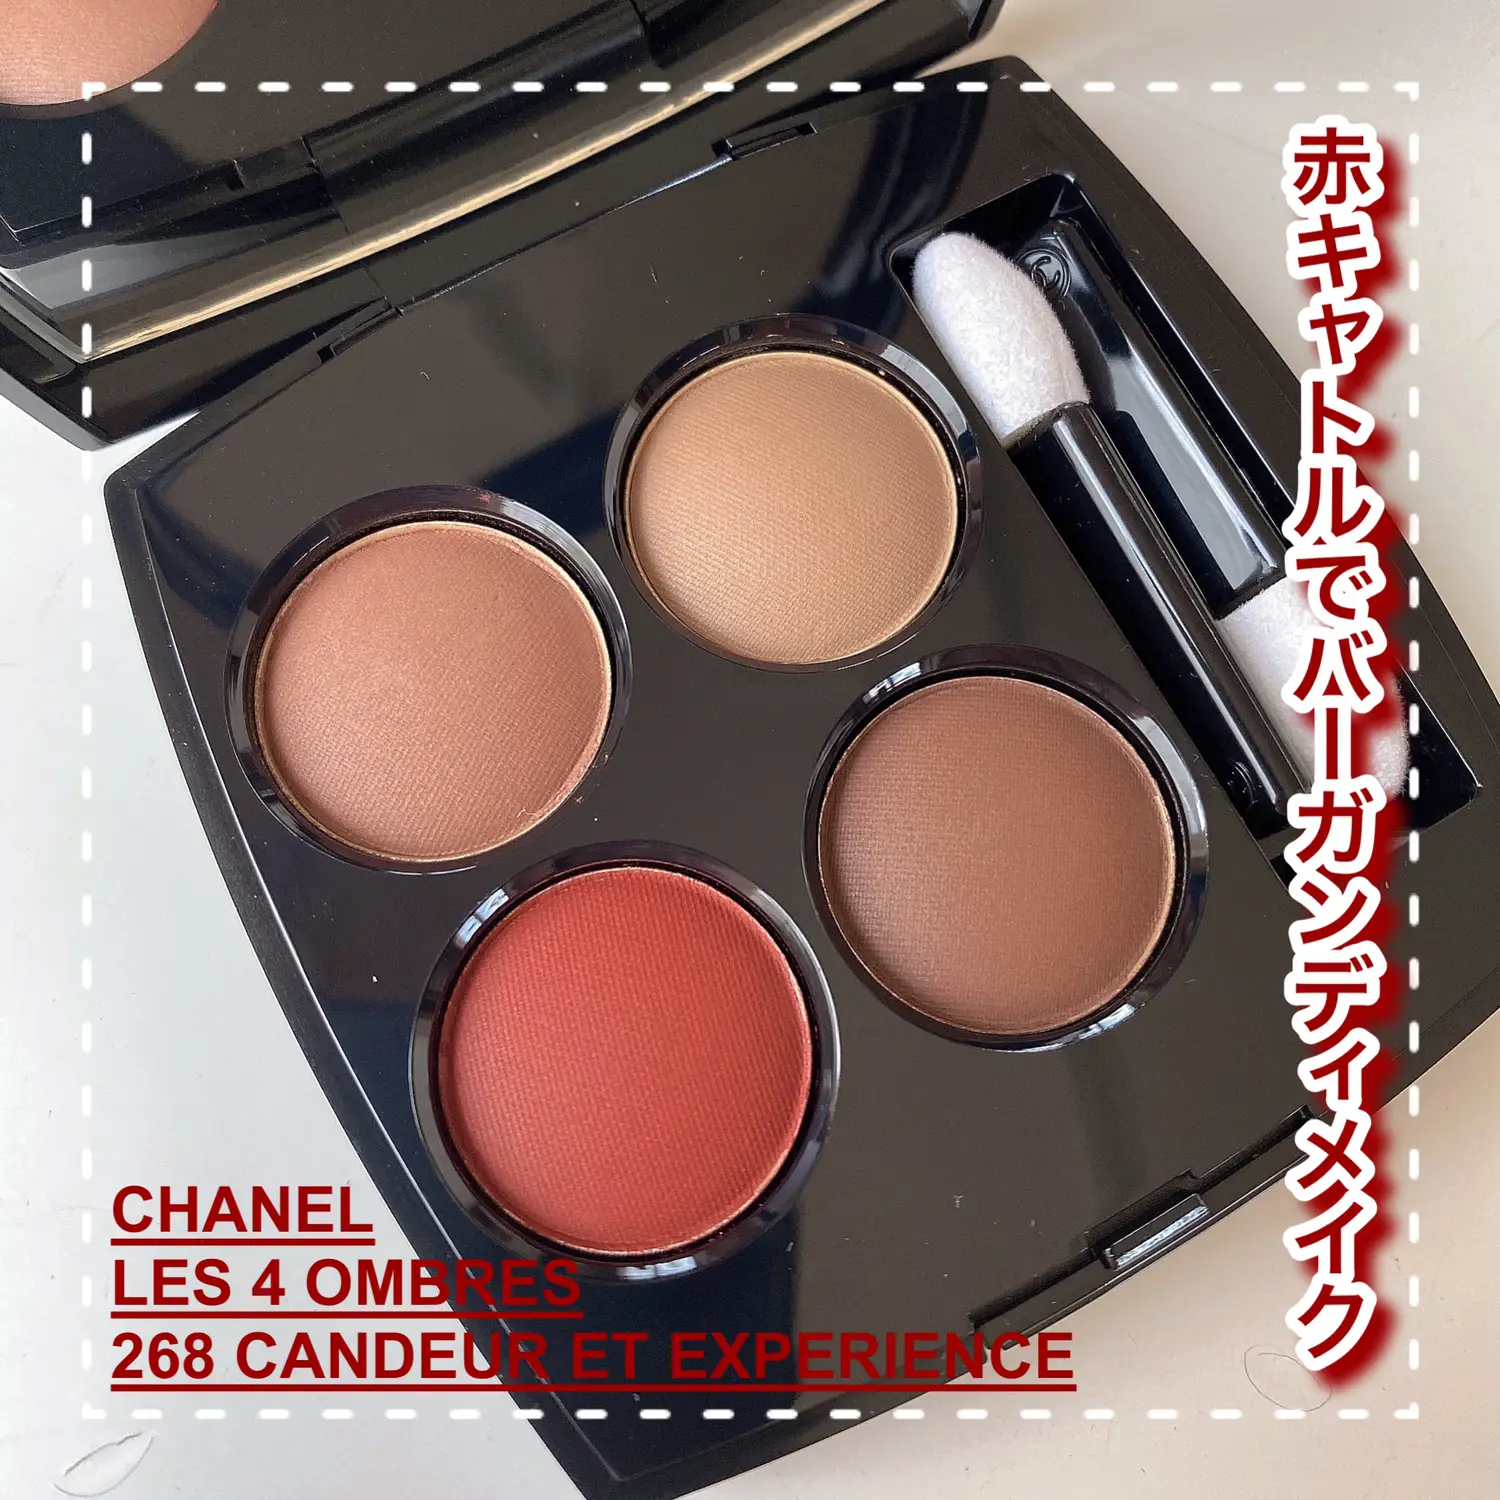 Chanel Limited Les 4 Ombres Quad Eye Shadow Palette 937 Ombres De Lune New